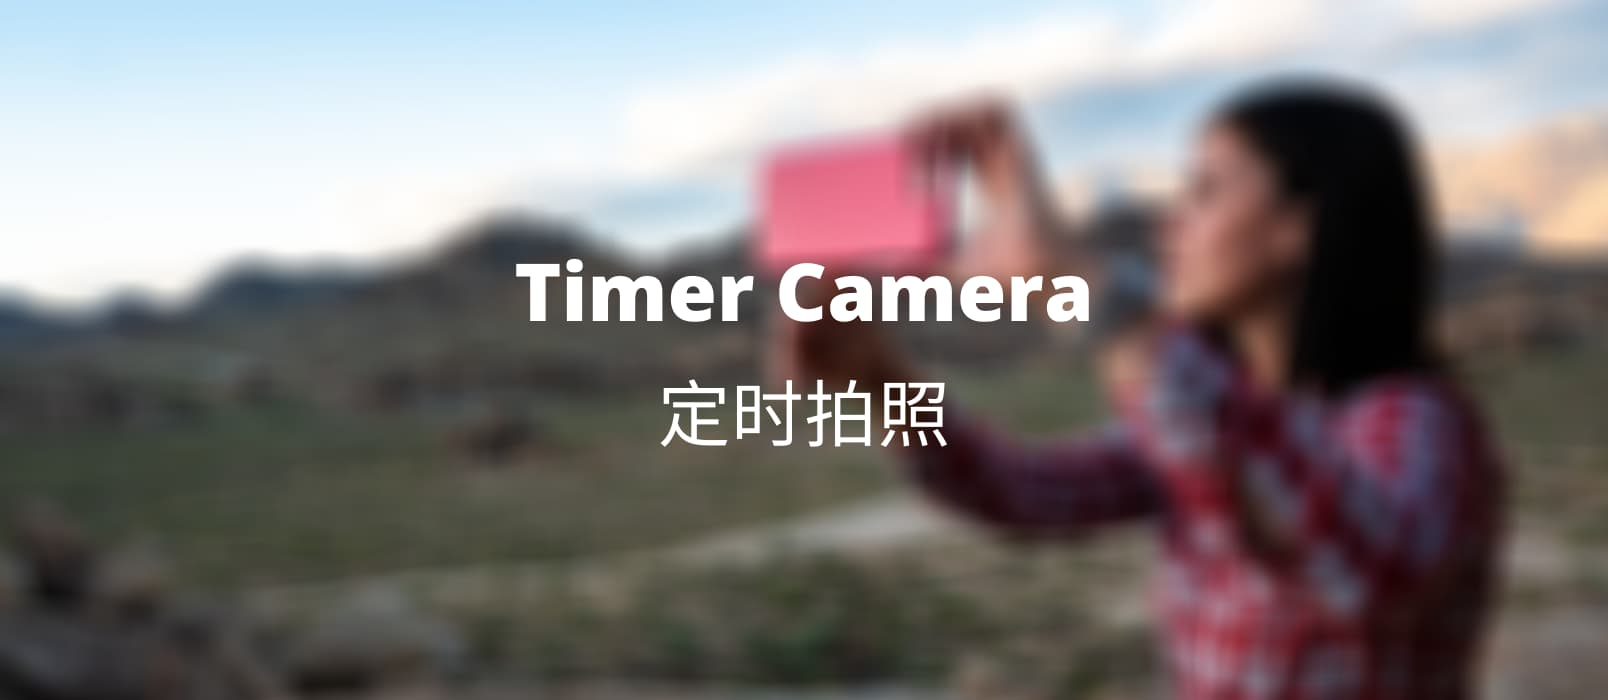 Timer Camera - 定时拍照应用[Android] 1